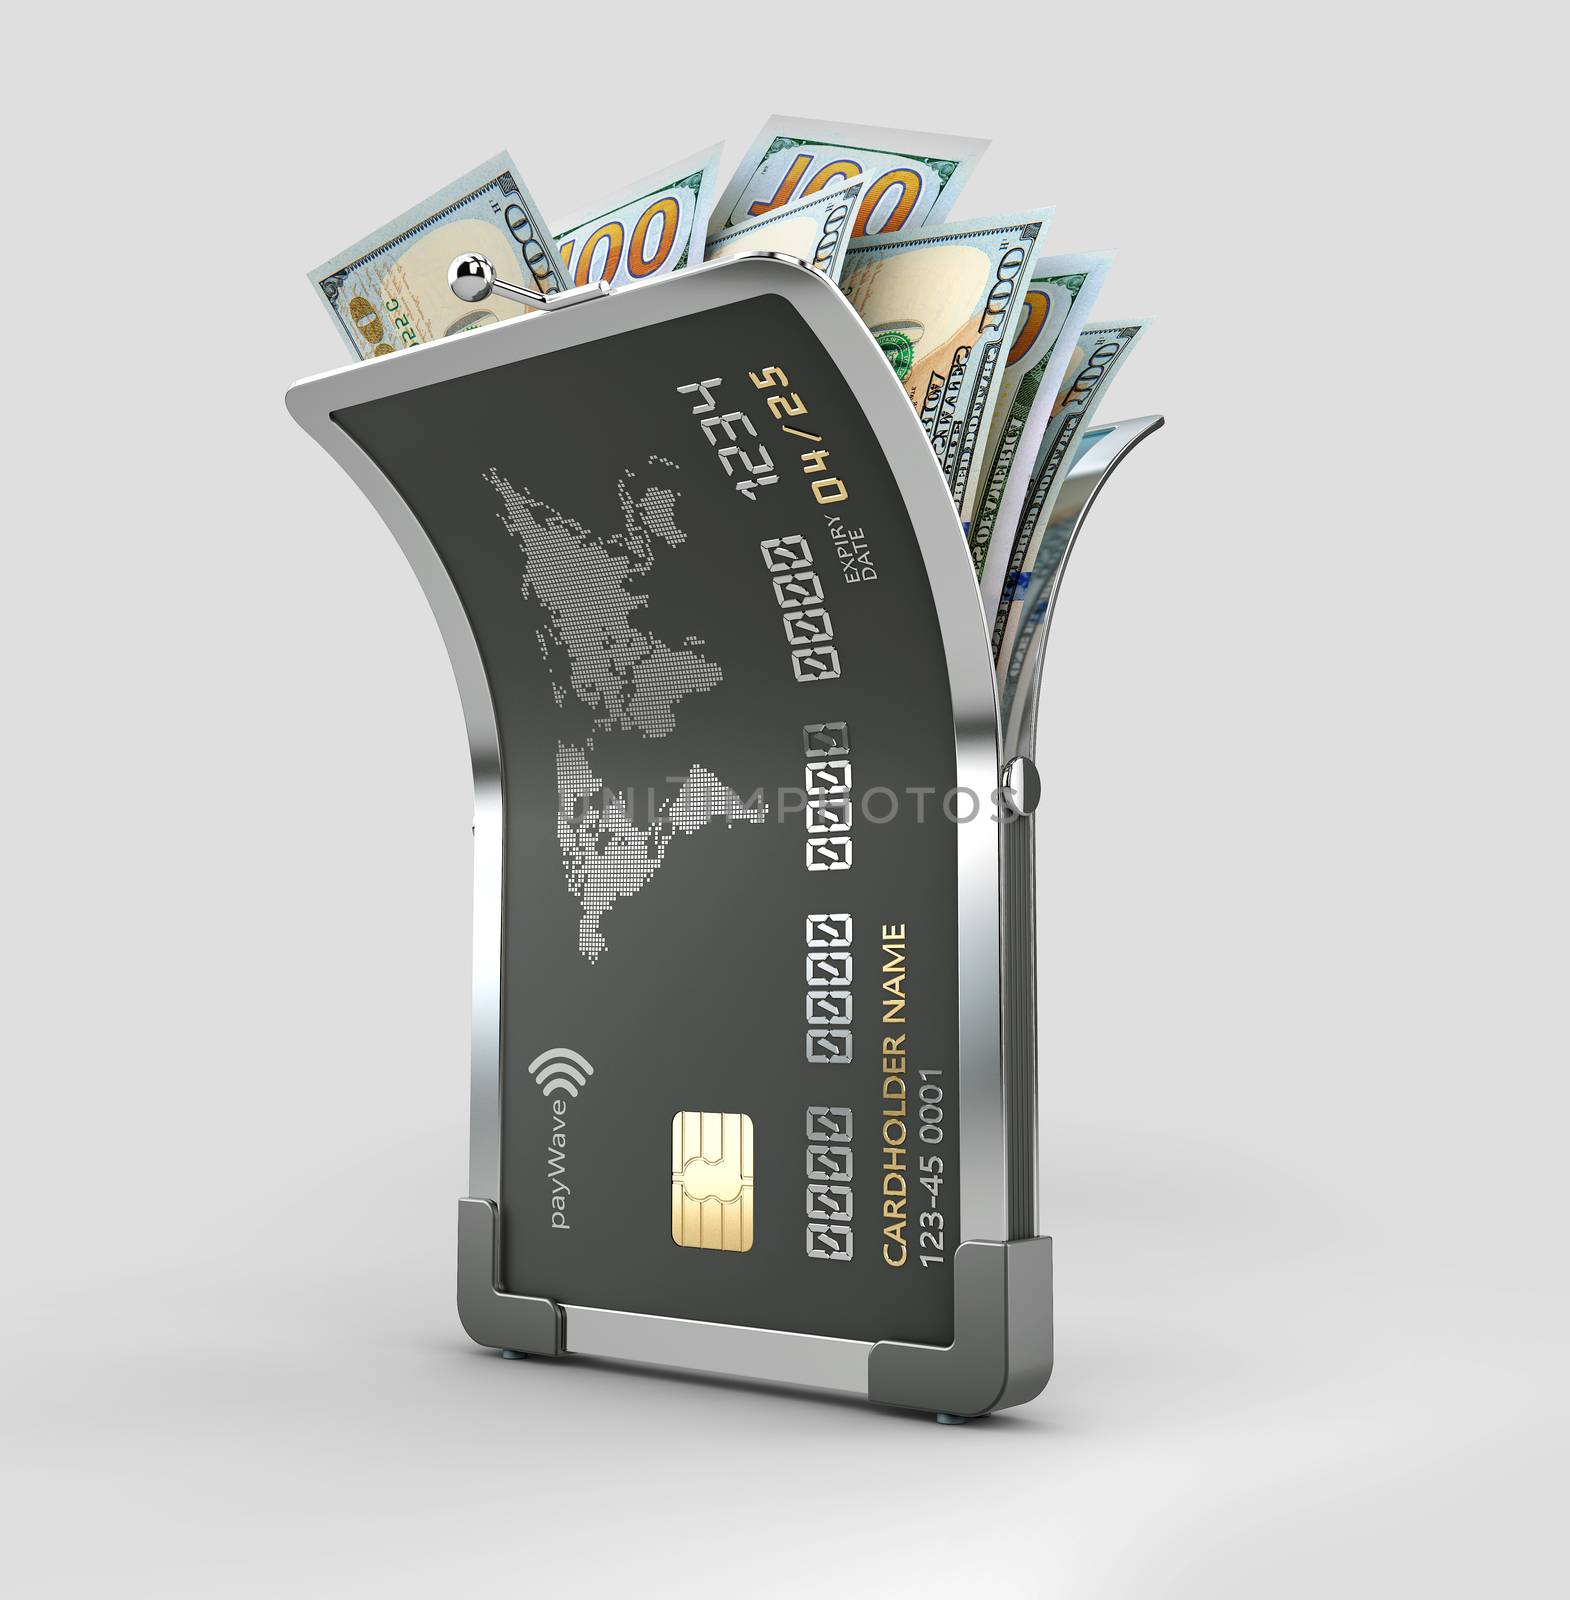 Open bank card with Dollars, clipping path included. 3d Rendering by tussik